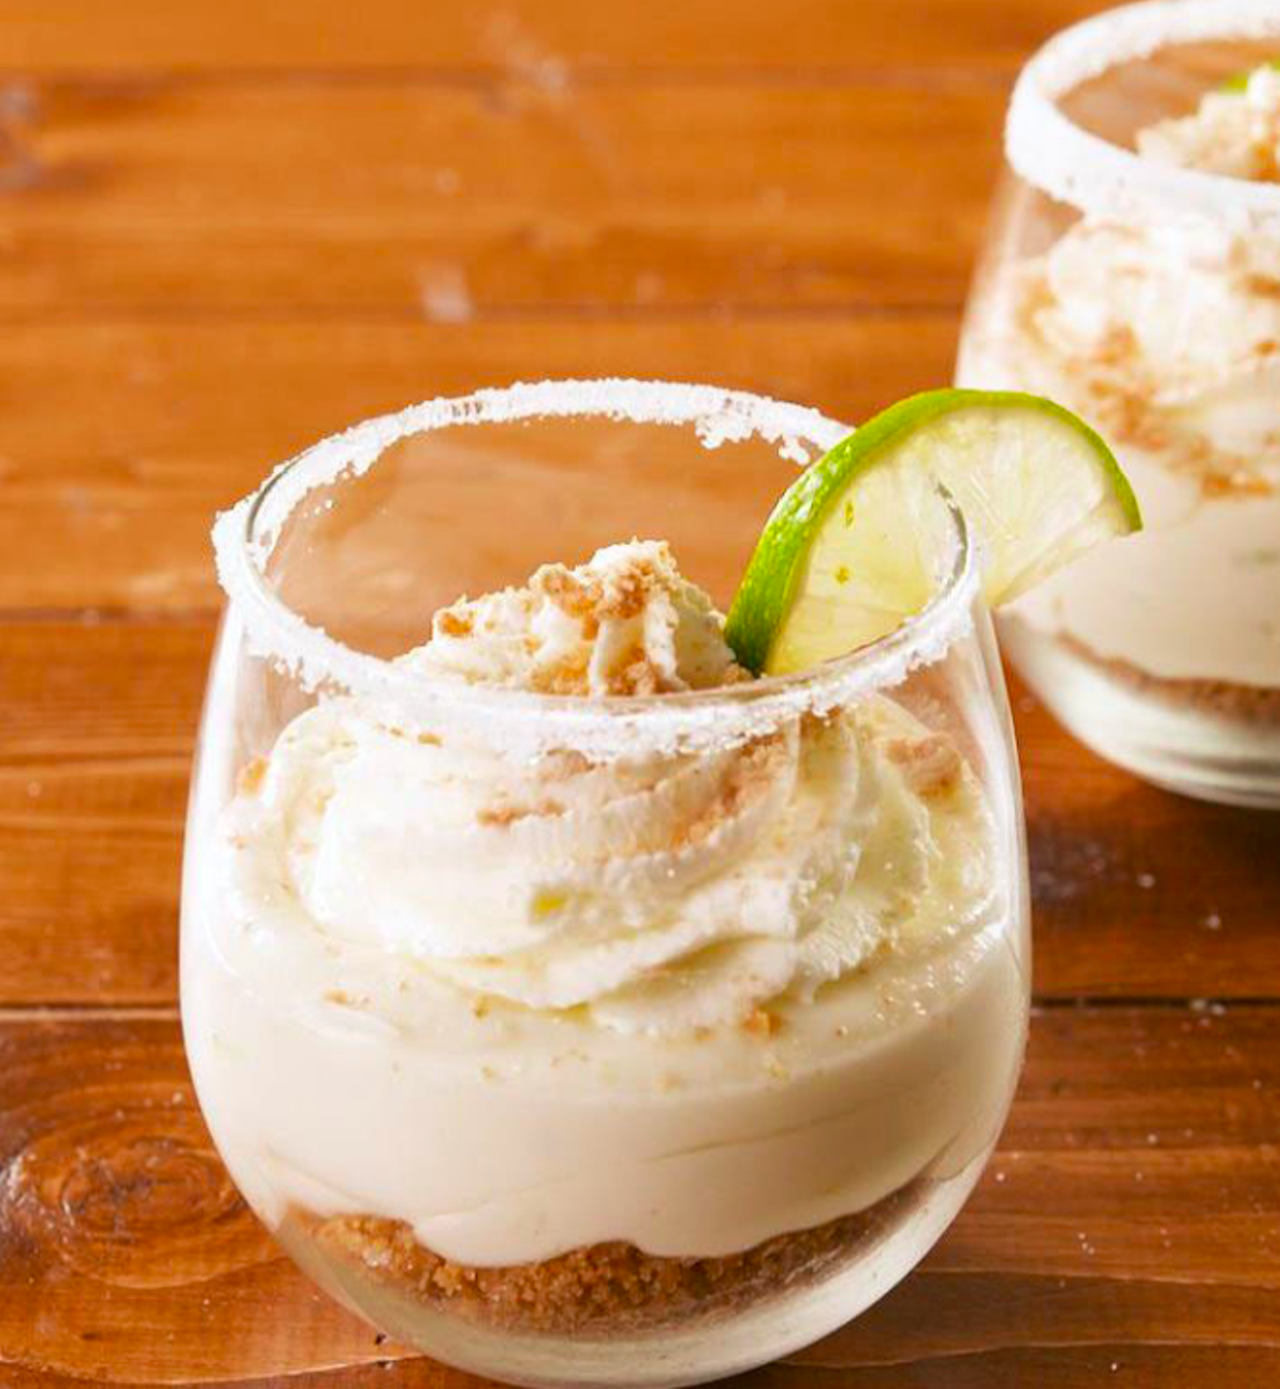 Margarita Cheesecake Mousse
Looking for a brunch treat with a little pizzazz? This boozy cheesecake mousse is a citrusy
delight. With a crust made of crushed graham crackers, melted butter, and sugar and a creamy filling infused with Casa
Del Sol Blanco, lime juice and zest - your taste buds will be begging for more. Add a touch of flair with a lime and sugar
rim, and you'll have a deliciously impressive dish to serve to your guests.
The Recipe:
- Crust*
- Cheesecake mousse**
- Lime wedges
- ¼ cup granulated sugar
- Whipped cream
- Crushed graham crackers
Crust*
- 9 graham crackers, finely crushed
- 5 tablespoons melted butter
- 2 tablespoons granulated sugar
Cheesecake mousse**
- 2, 8-ounce cream cheese packages, softened
- 2 cups powdered sugar
- 3 tablespoons Cas Del Sol Blanco Tequila
- 1 lime, juiced and zested
- 1 teaspoon vanilla extract
- 1/3 teaspoon kosher salt
- 1 cup whipped cream
For the crust: In a medium bowl, combine crushed graham crackers, melted butter and sugar together. Stir to
combine and set aside.
For the cheesecake mousse: In a large bowl, beat cream cheese and powdered sugar until smooth. Add tequila,
lime juice and zest, vanilla extract, salt and beat until incorporated. Fold in whipped cream. Transfer cheesecake
mousse to piping bag.
For the completed dessert: Run a lime wedge around 6 glasses and place sugar in a small plate. Dip rim of
glasses into sugar to coat. Divide graham cracker mixture between glasses and lightly pack with spoon, then pipe
cheesecake mousse over the crusts. Refrigerate until chilled, at least 1 hour and up to overnight. When ready to
serve, top with whipped cream, crushed graham crackers and a lime wedge.